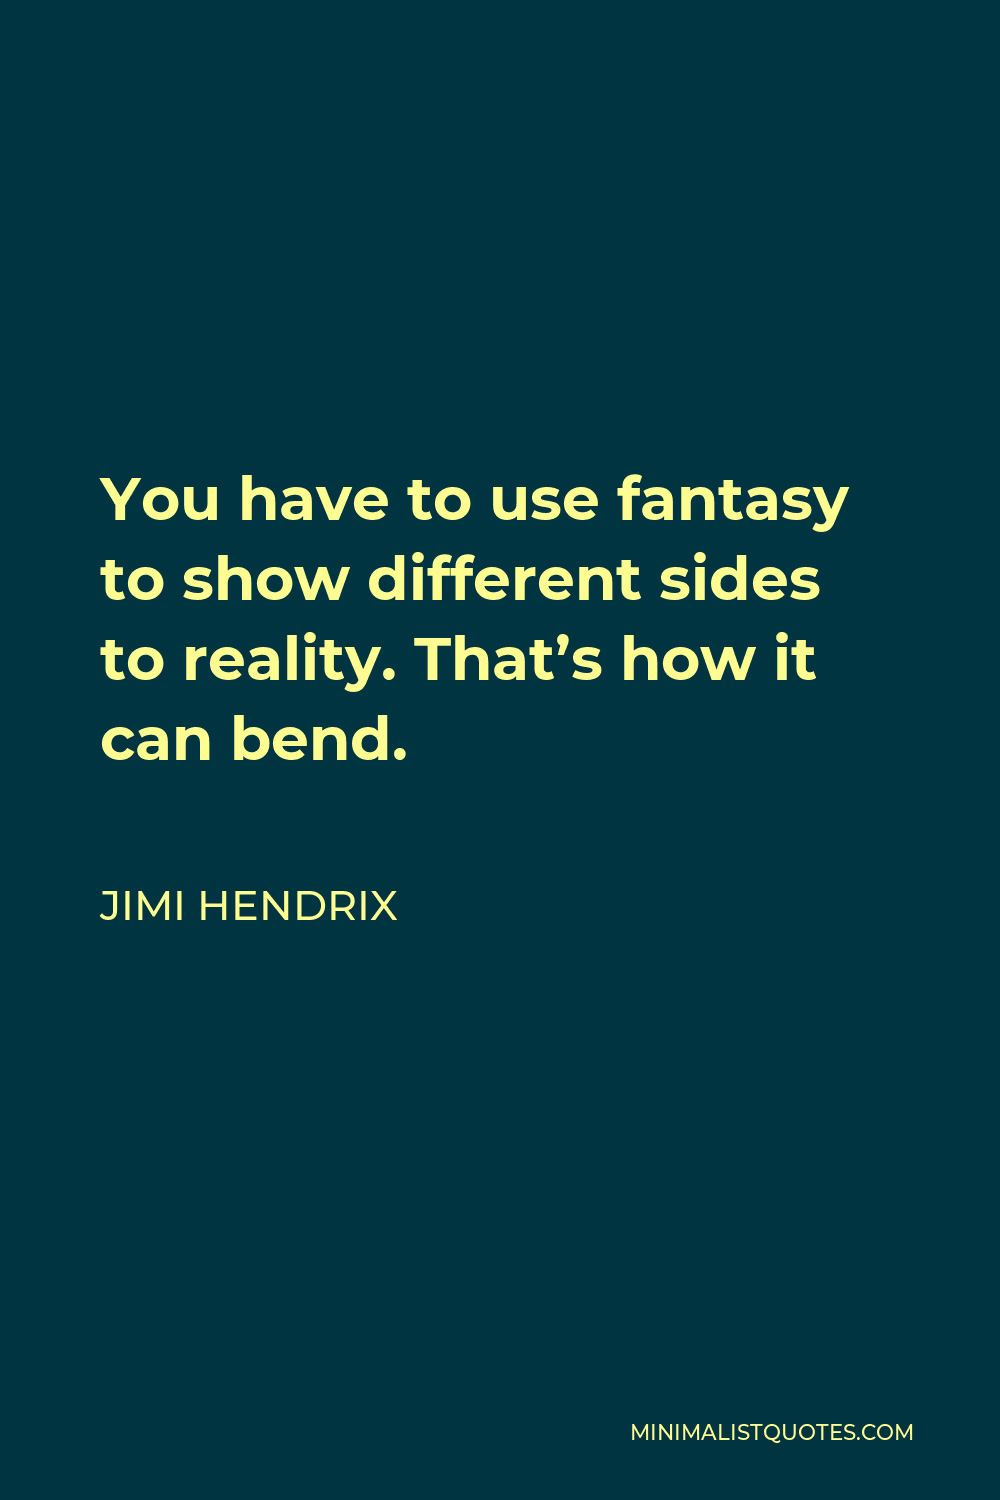 Jimi Hendrix Quote - You have to use fantasy to show different sides to reality. That’s how it can bend.